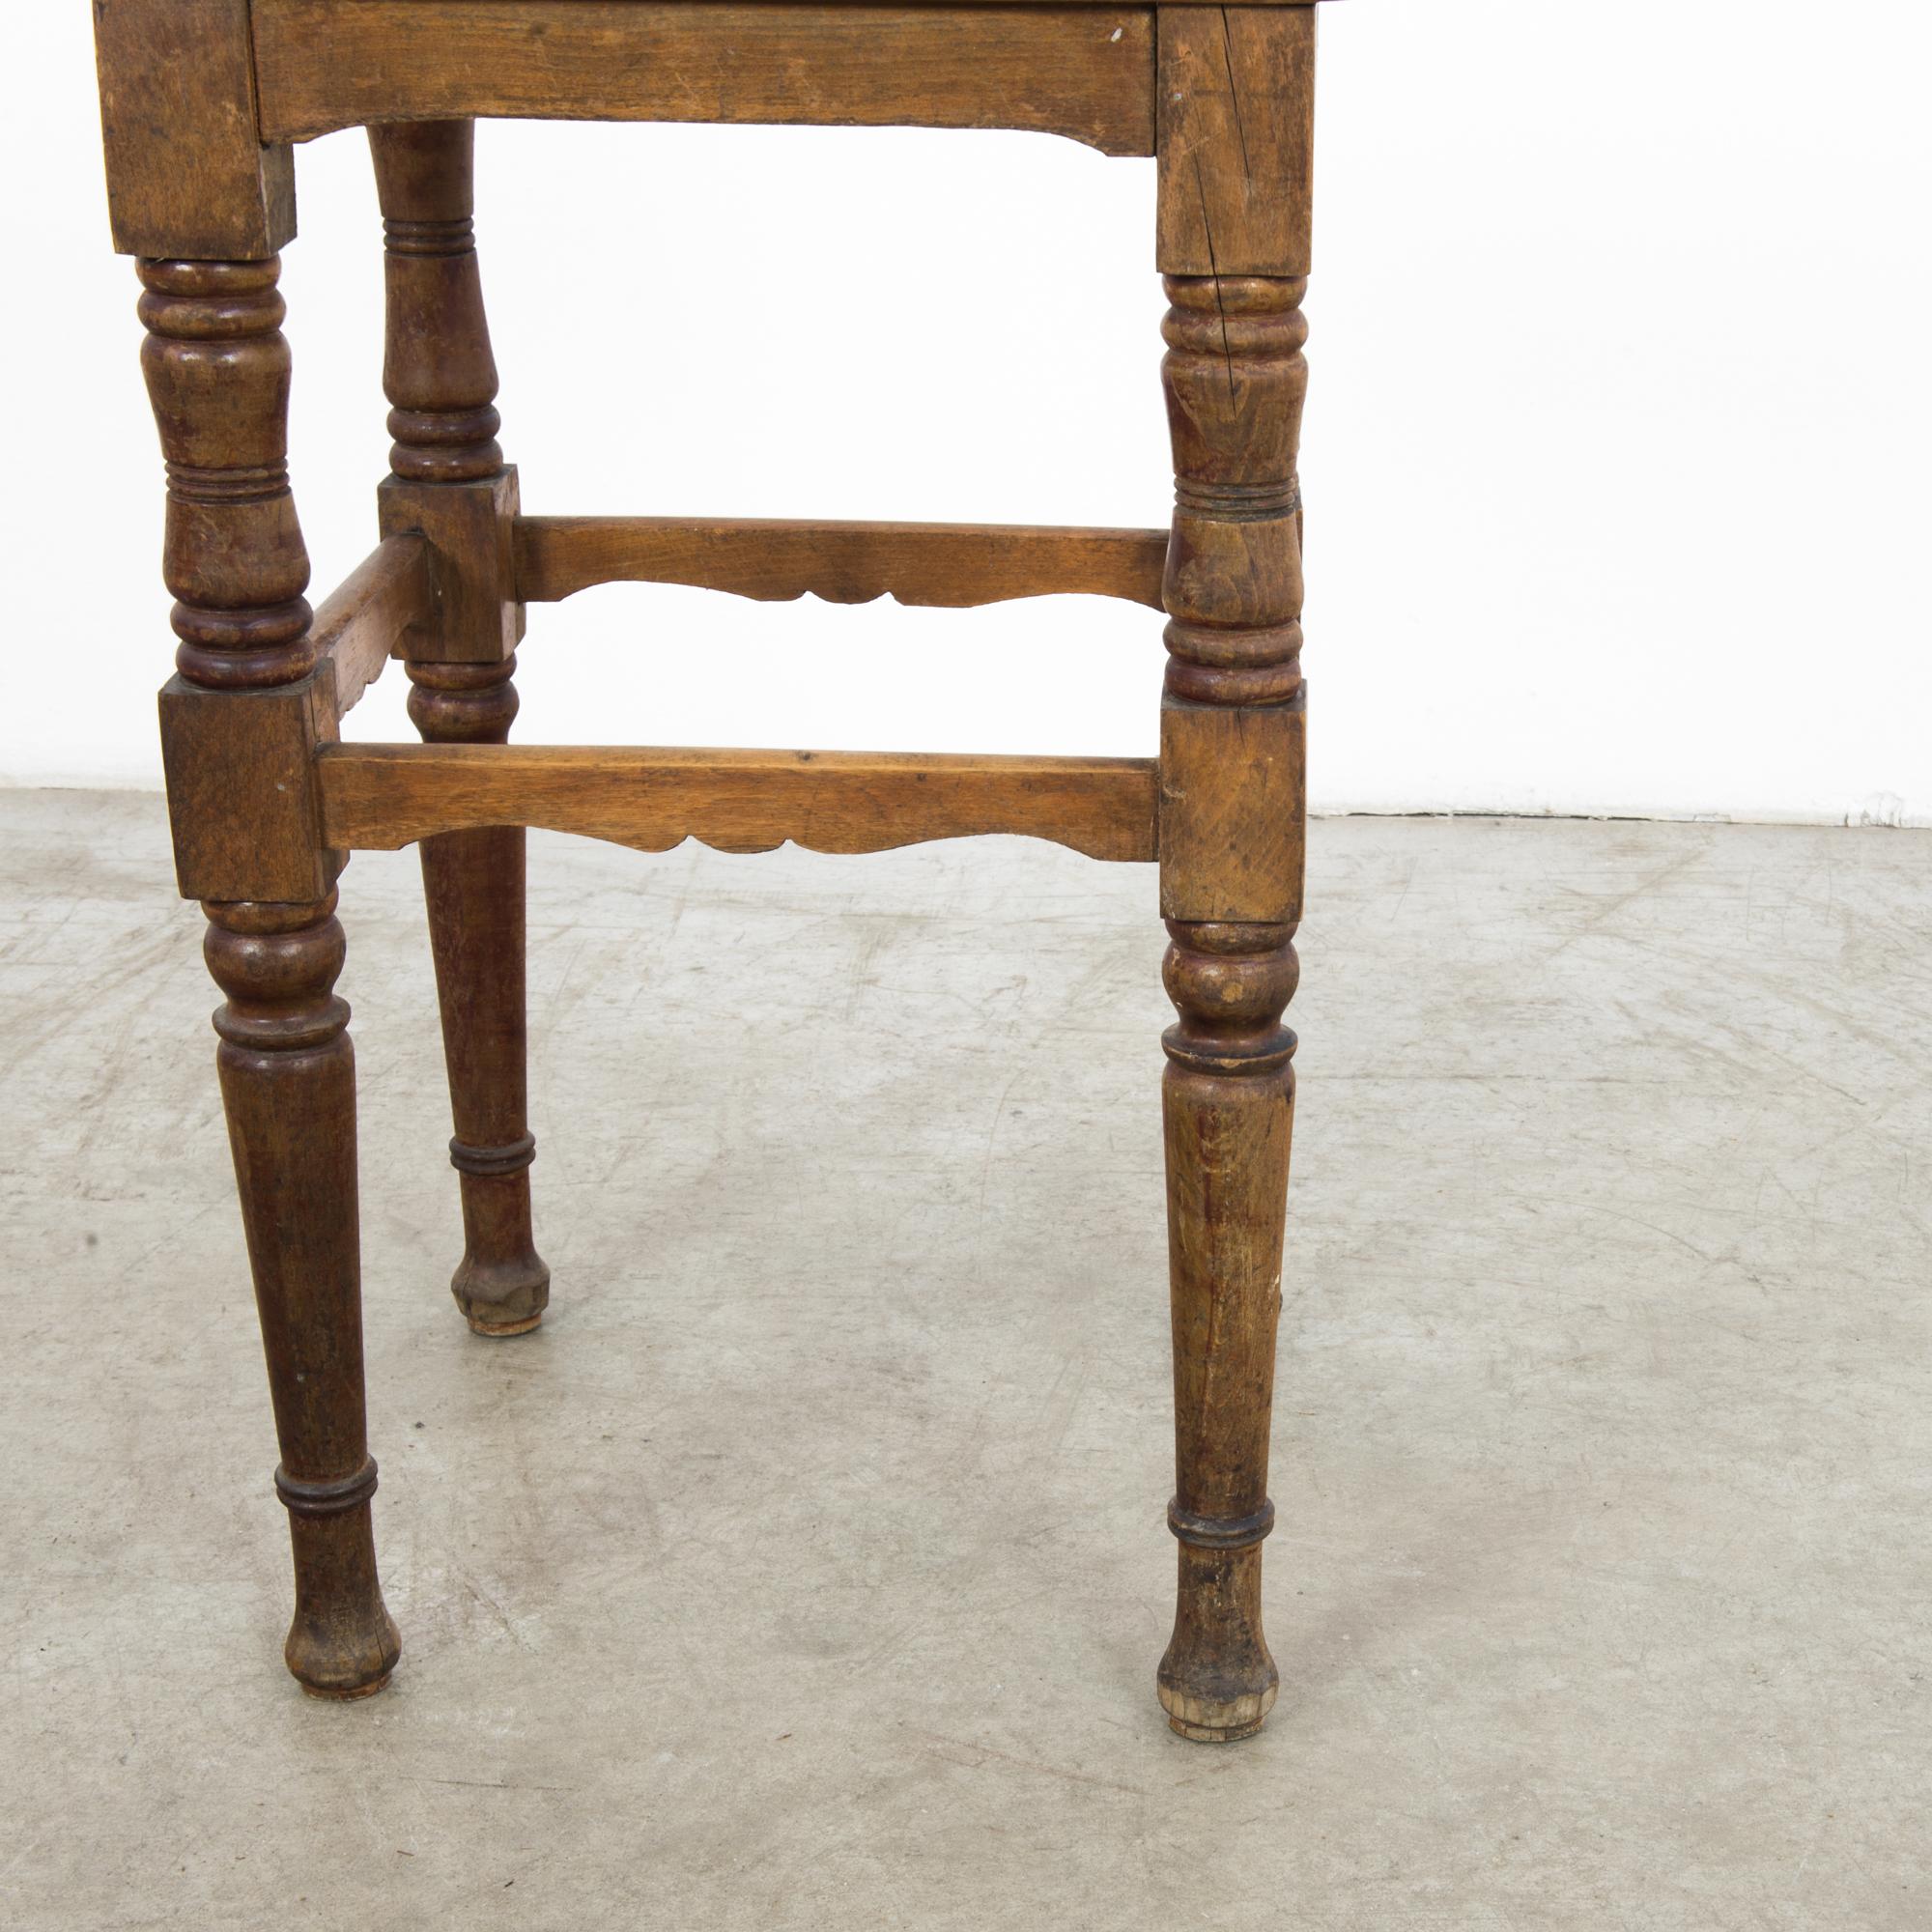 This wooden stool was made in Belgium and features a slightly tilted square seat with a cane center. It is supported on four turned legs with scalloped stretchers. With its warm tone and timeworn patina, the stool will impart a rustic, farmhouse